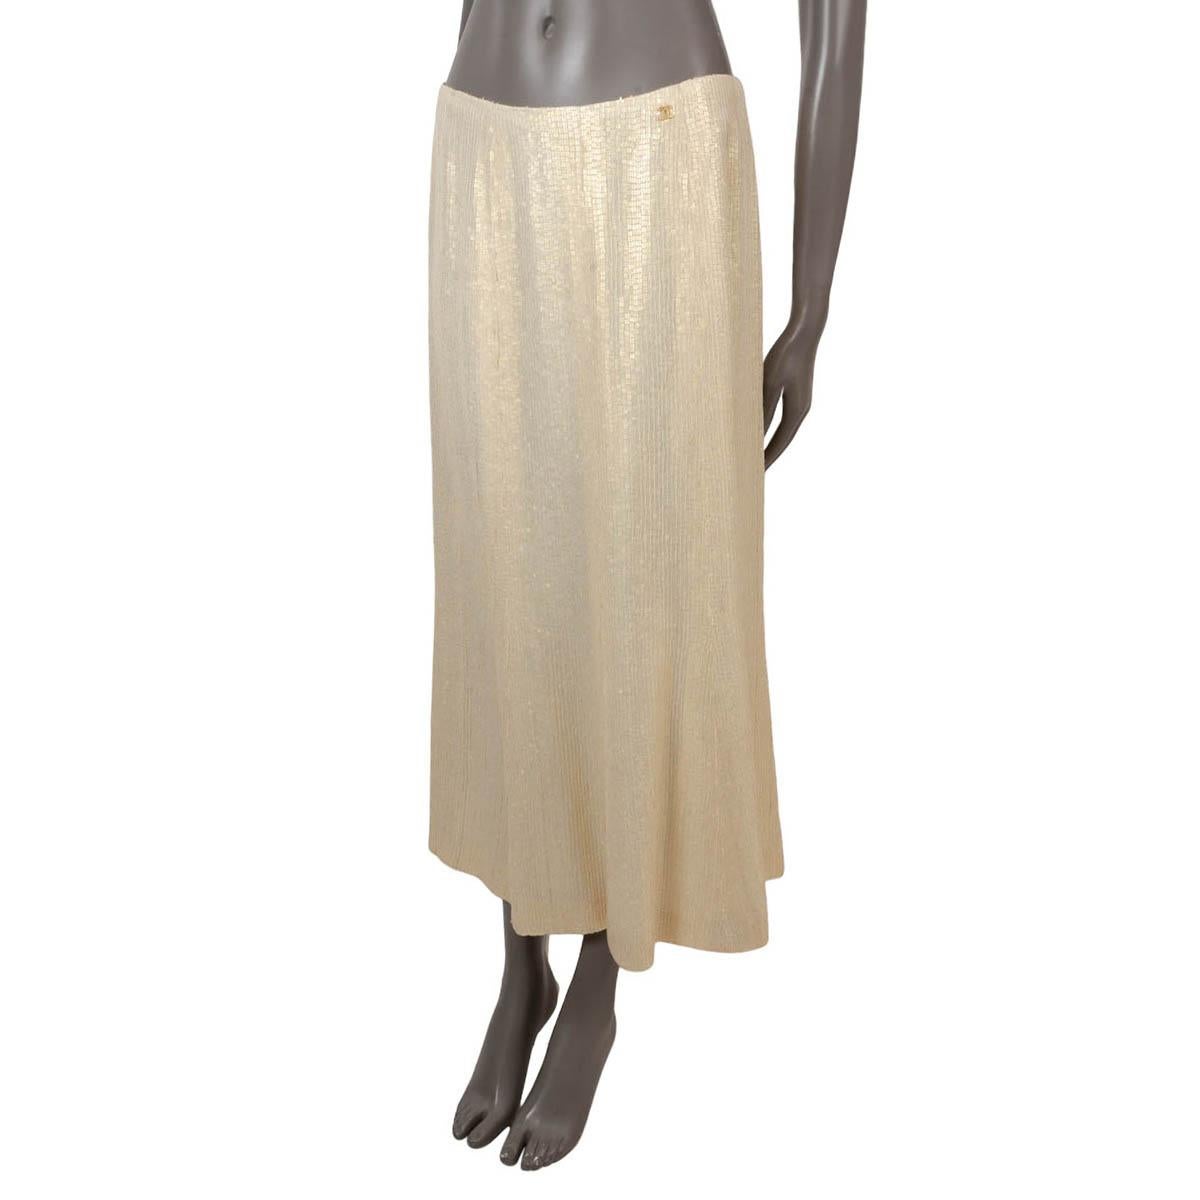 100% authentic Chanel sequin midi skirt in vanilla silk (100%). Features square sequins through-out, flared silhouette and CC detail at the waist. Closes with a concealed zipper in the back and is lined in silk (100%). Has been worn and is in